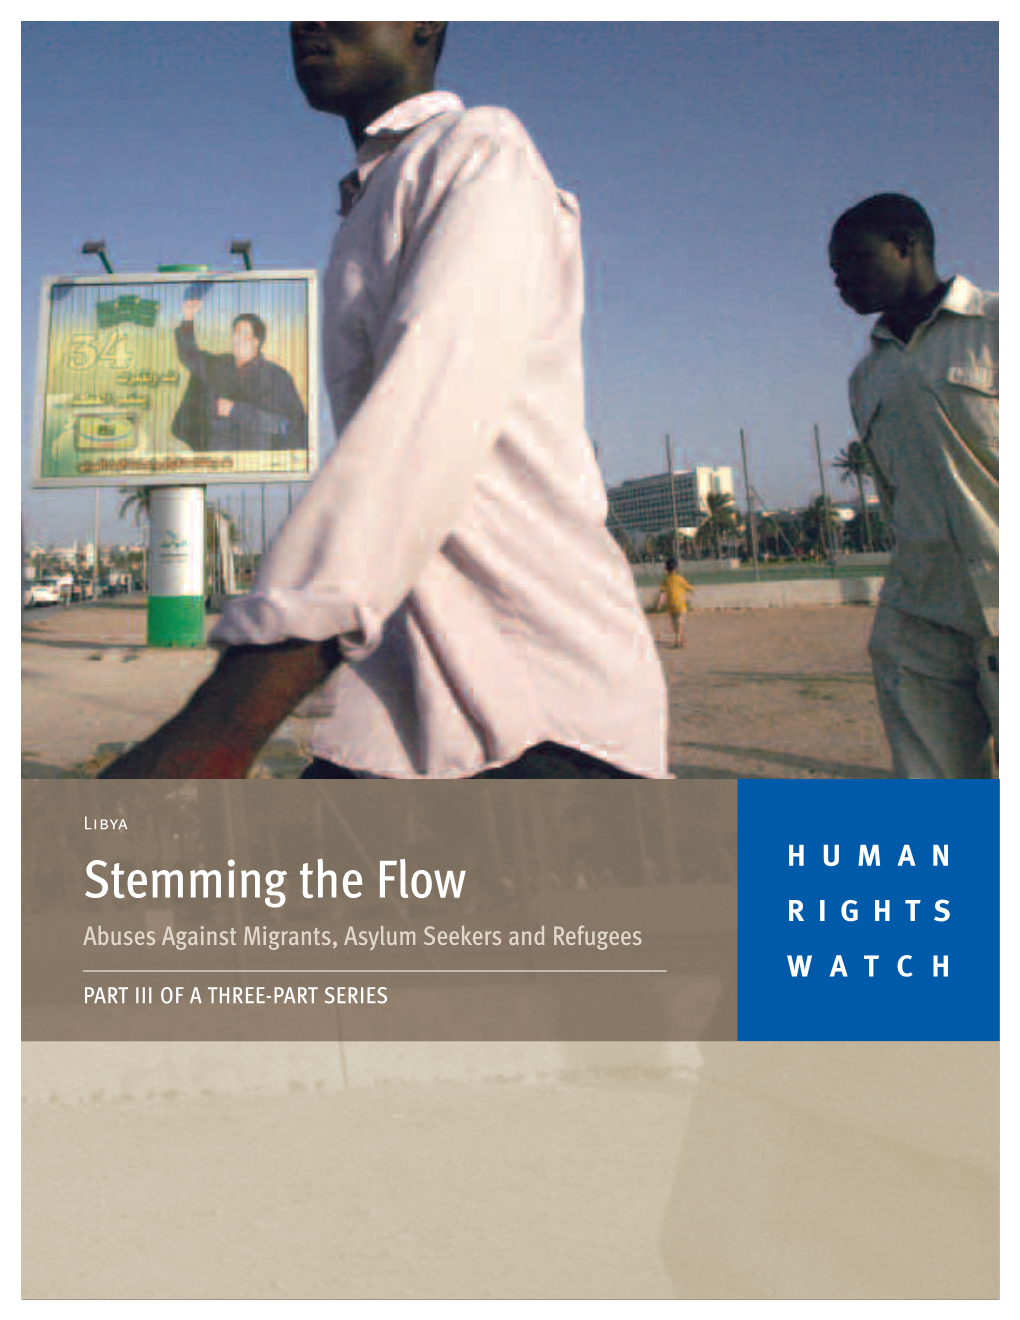 Stemming the Flow HUMAN RIGHTS Abuses Against Migrants, Asylum Seekers and Refugees WATCH PART III of a THREE-PART SERIES September 2006 Volume 18, No